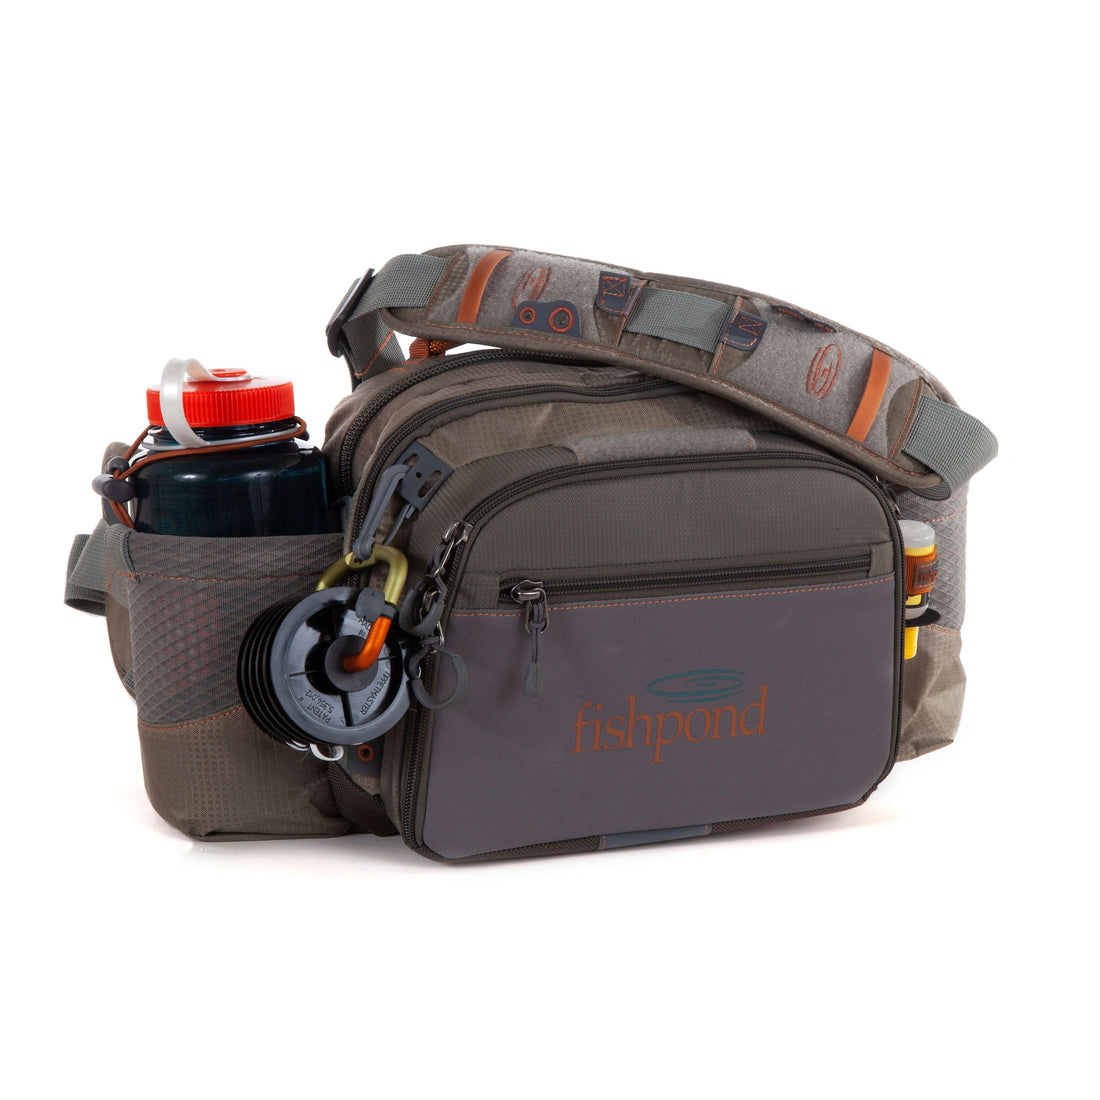 Fishpond Waterdance, Pro Guide Pack